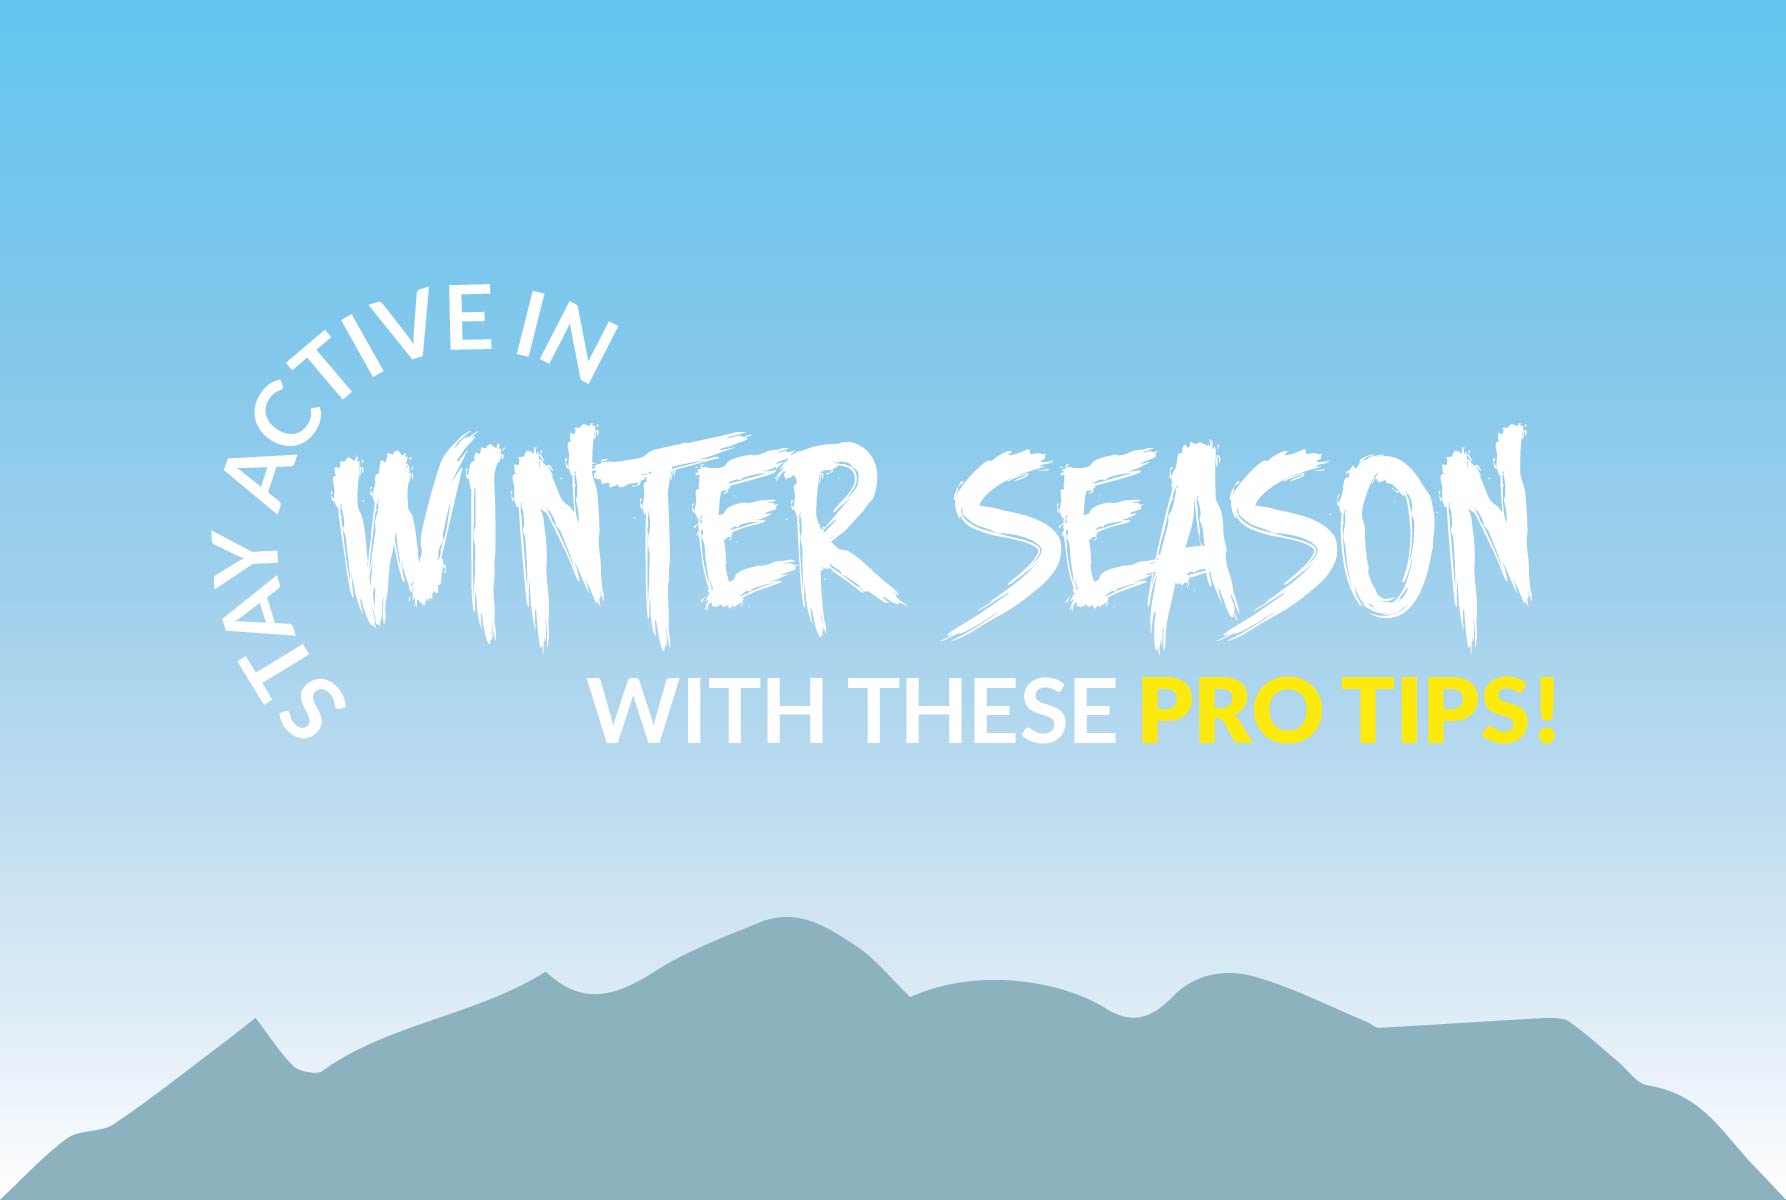 Stay active in winter season with these pro tips!